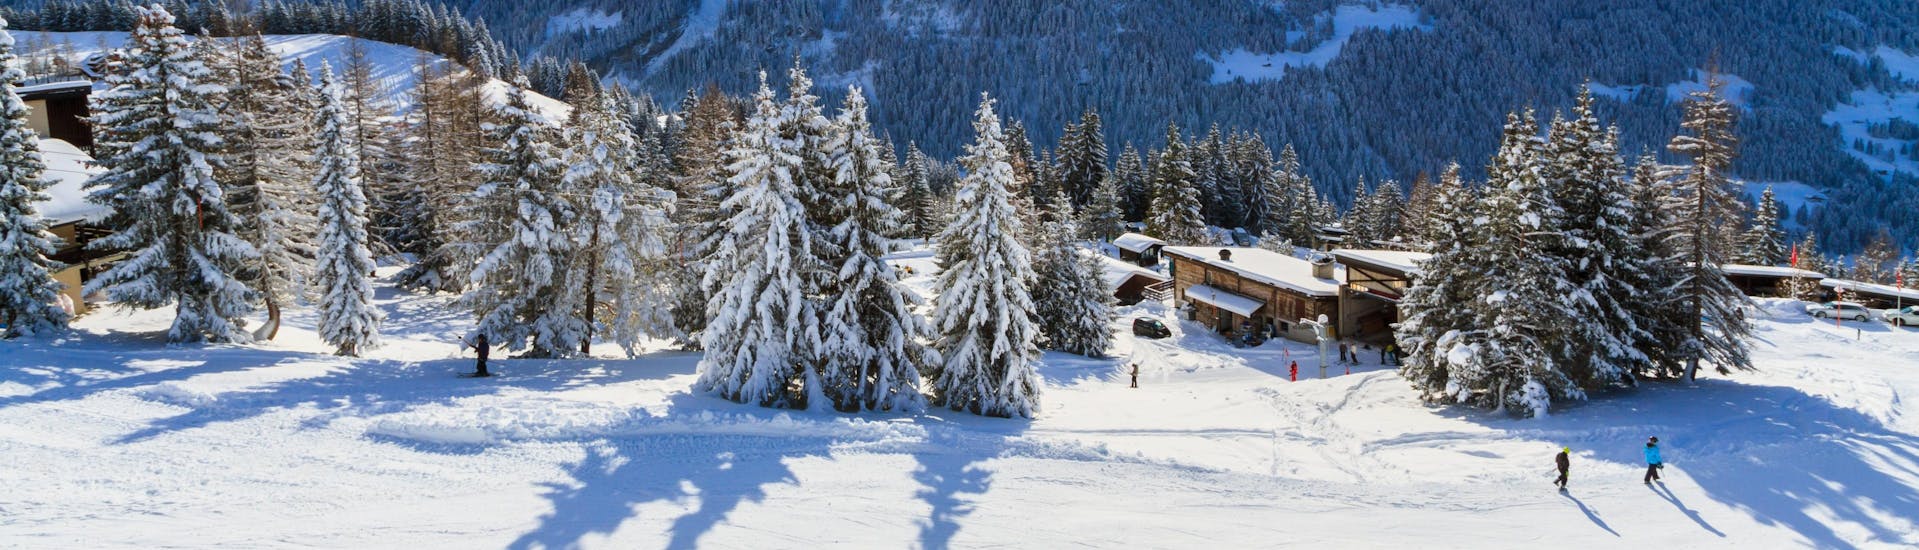 A panoramic view of the ski slopes and the surrounding mountains of Villars-Bretaye, a popular Swiss ski resort where visitors can book ski lessons with one of the local ski schools.